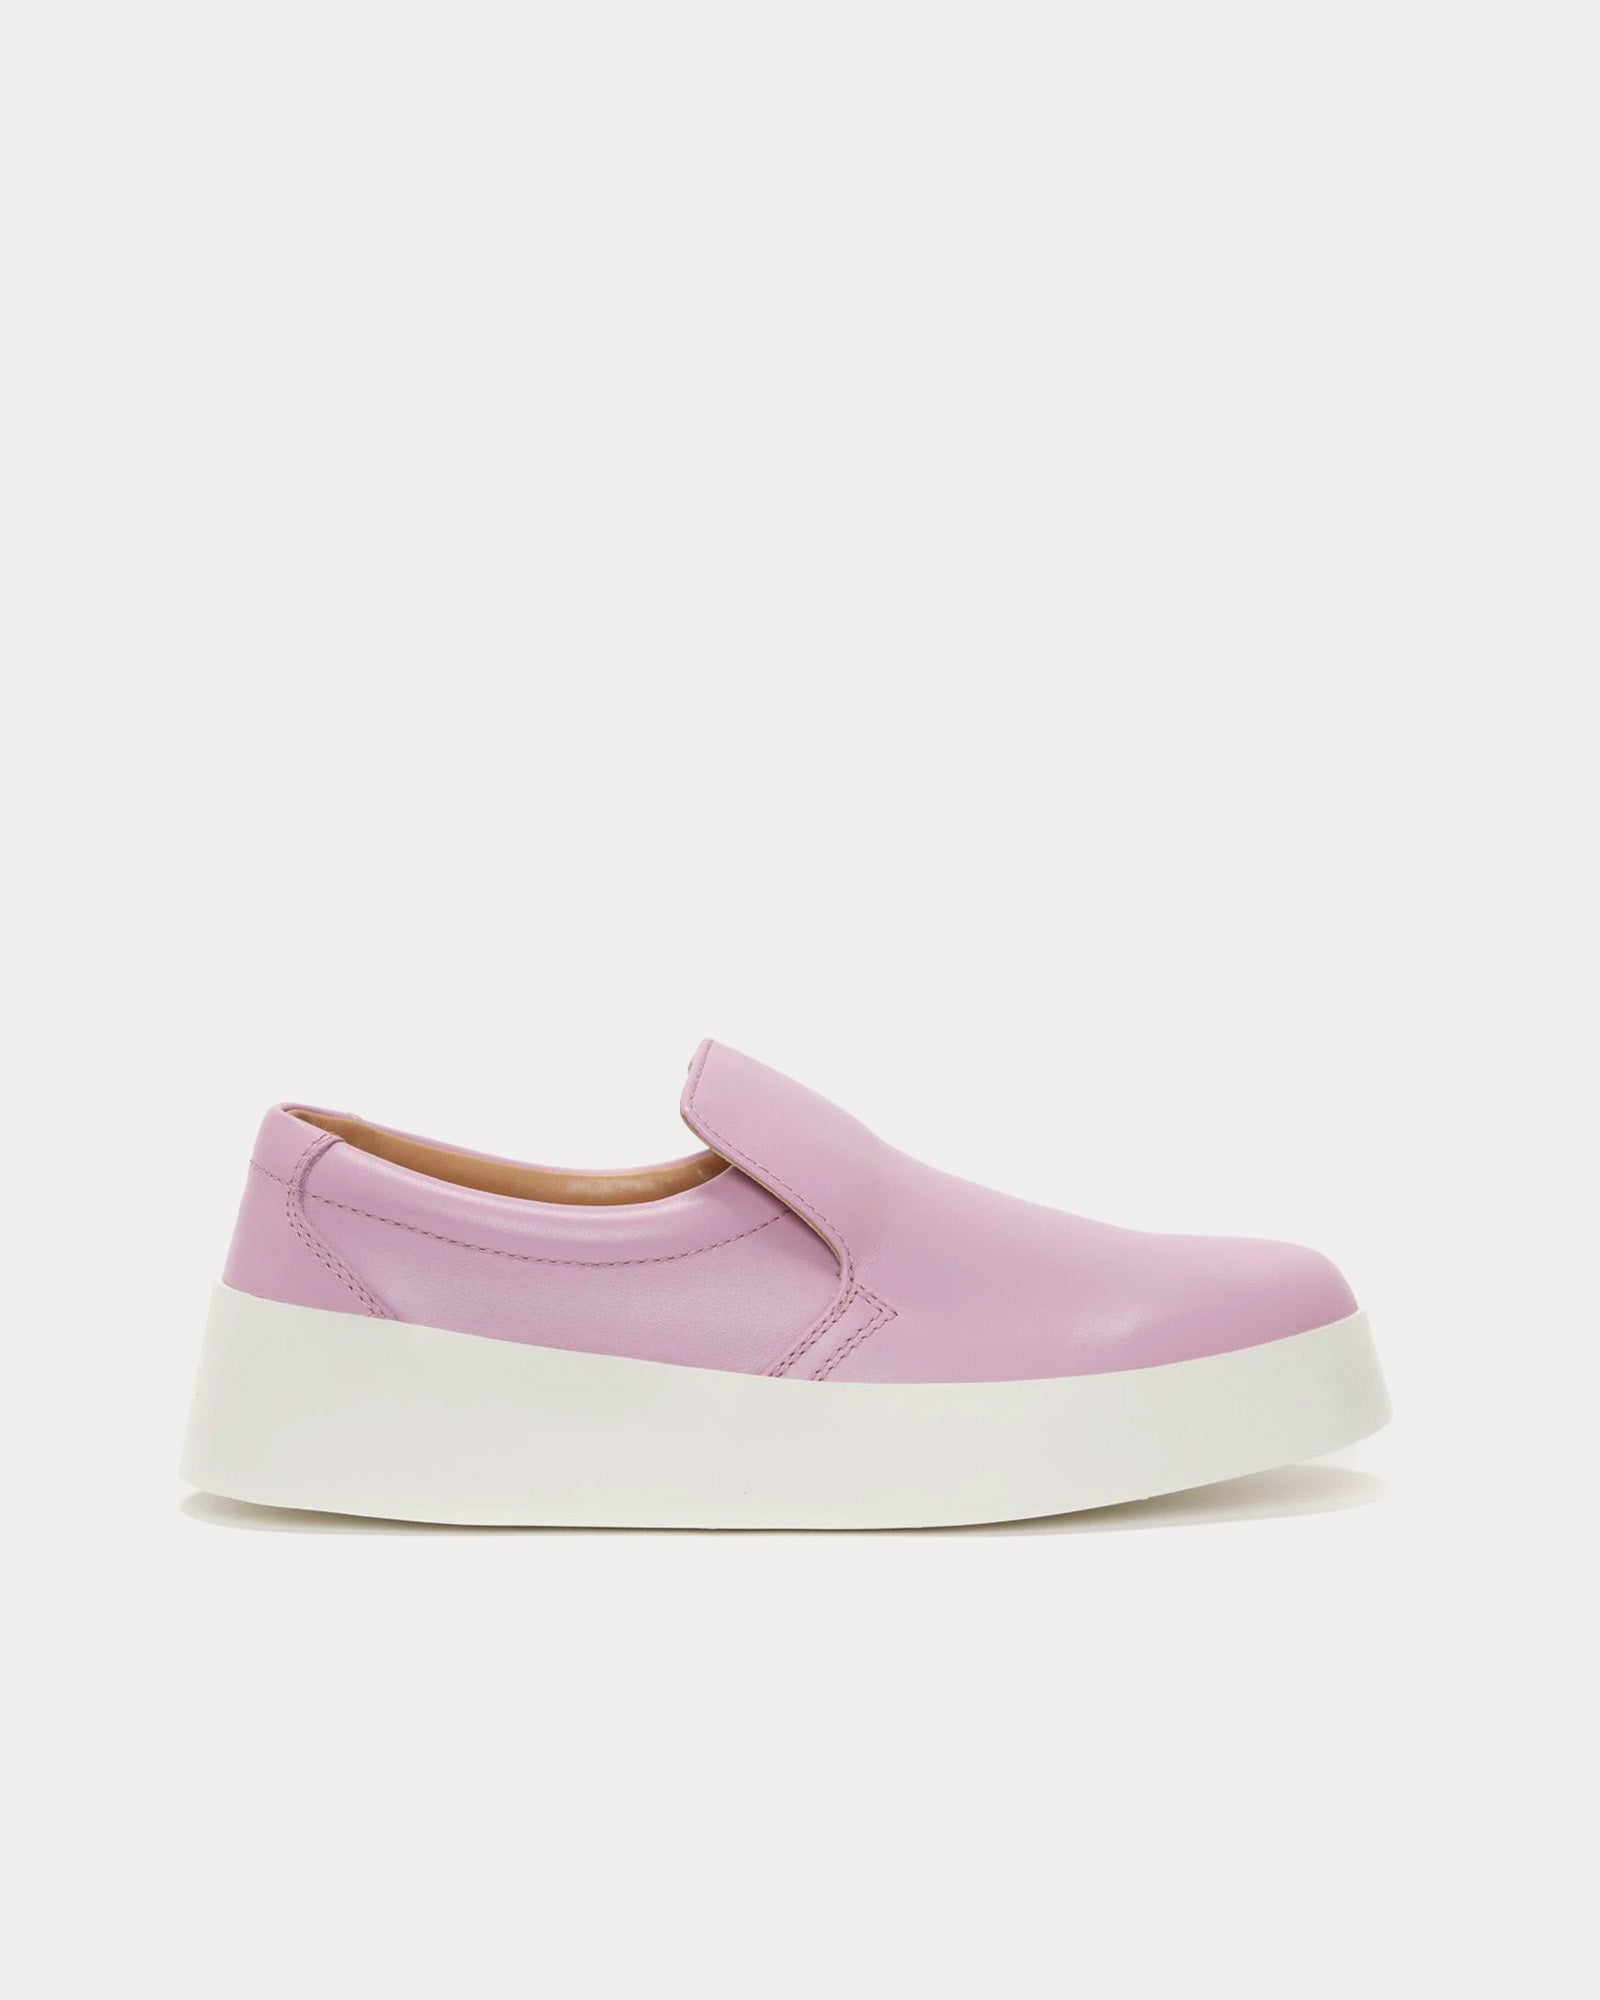 JW Anderson - Smooth Leather Pink Slip On Sneakers